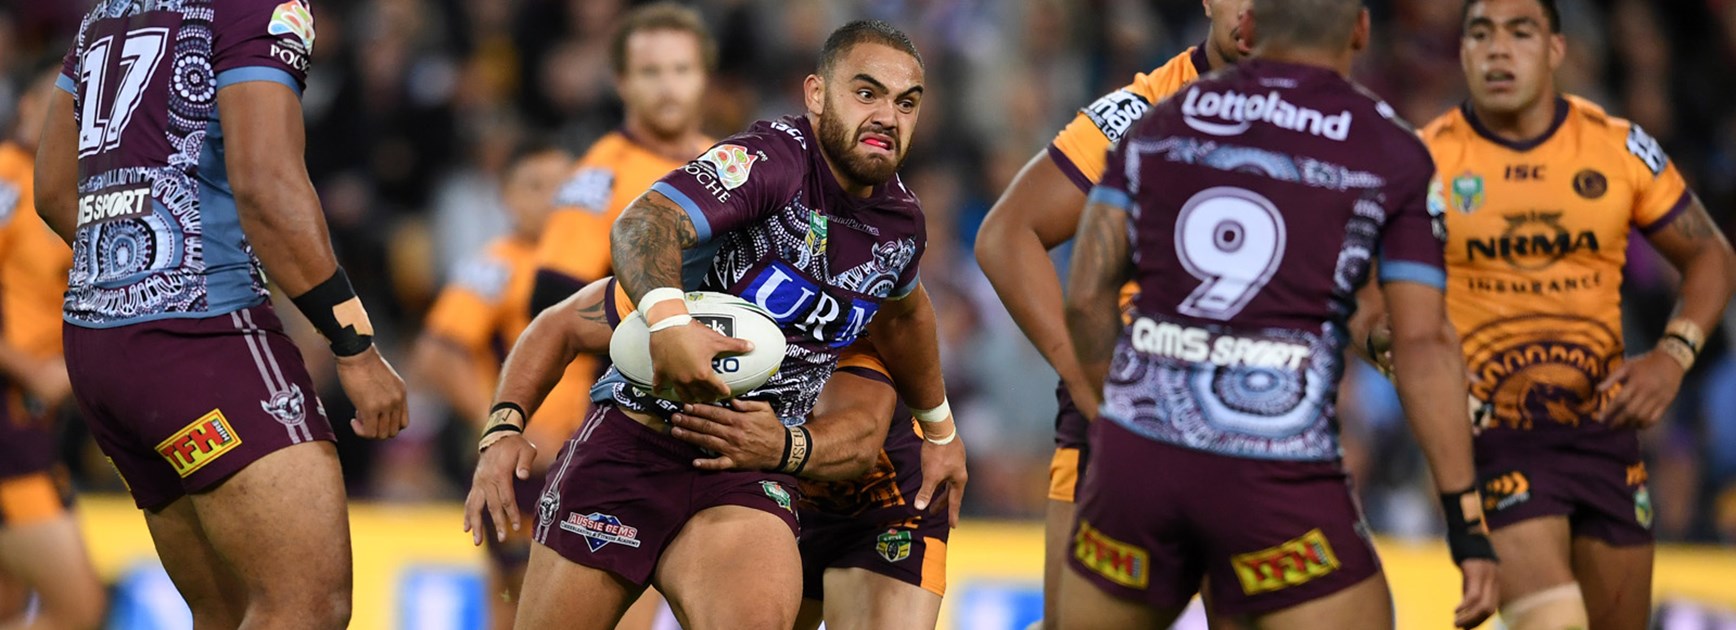 NRL | Manly record superb 38-24 win over Broncos